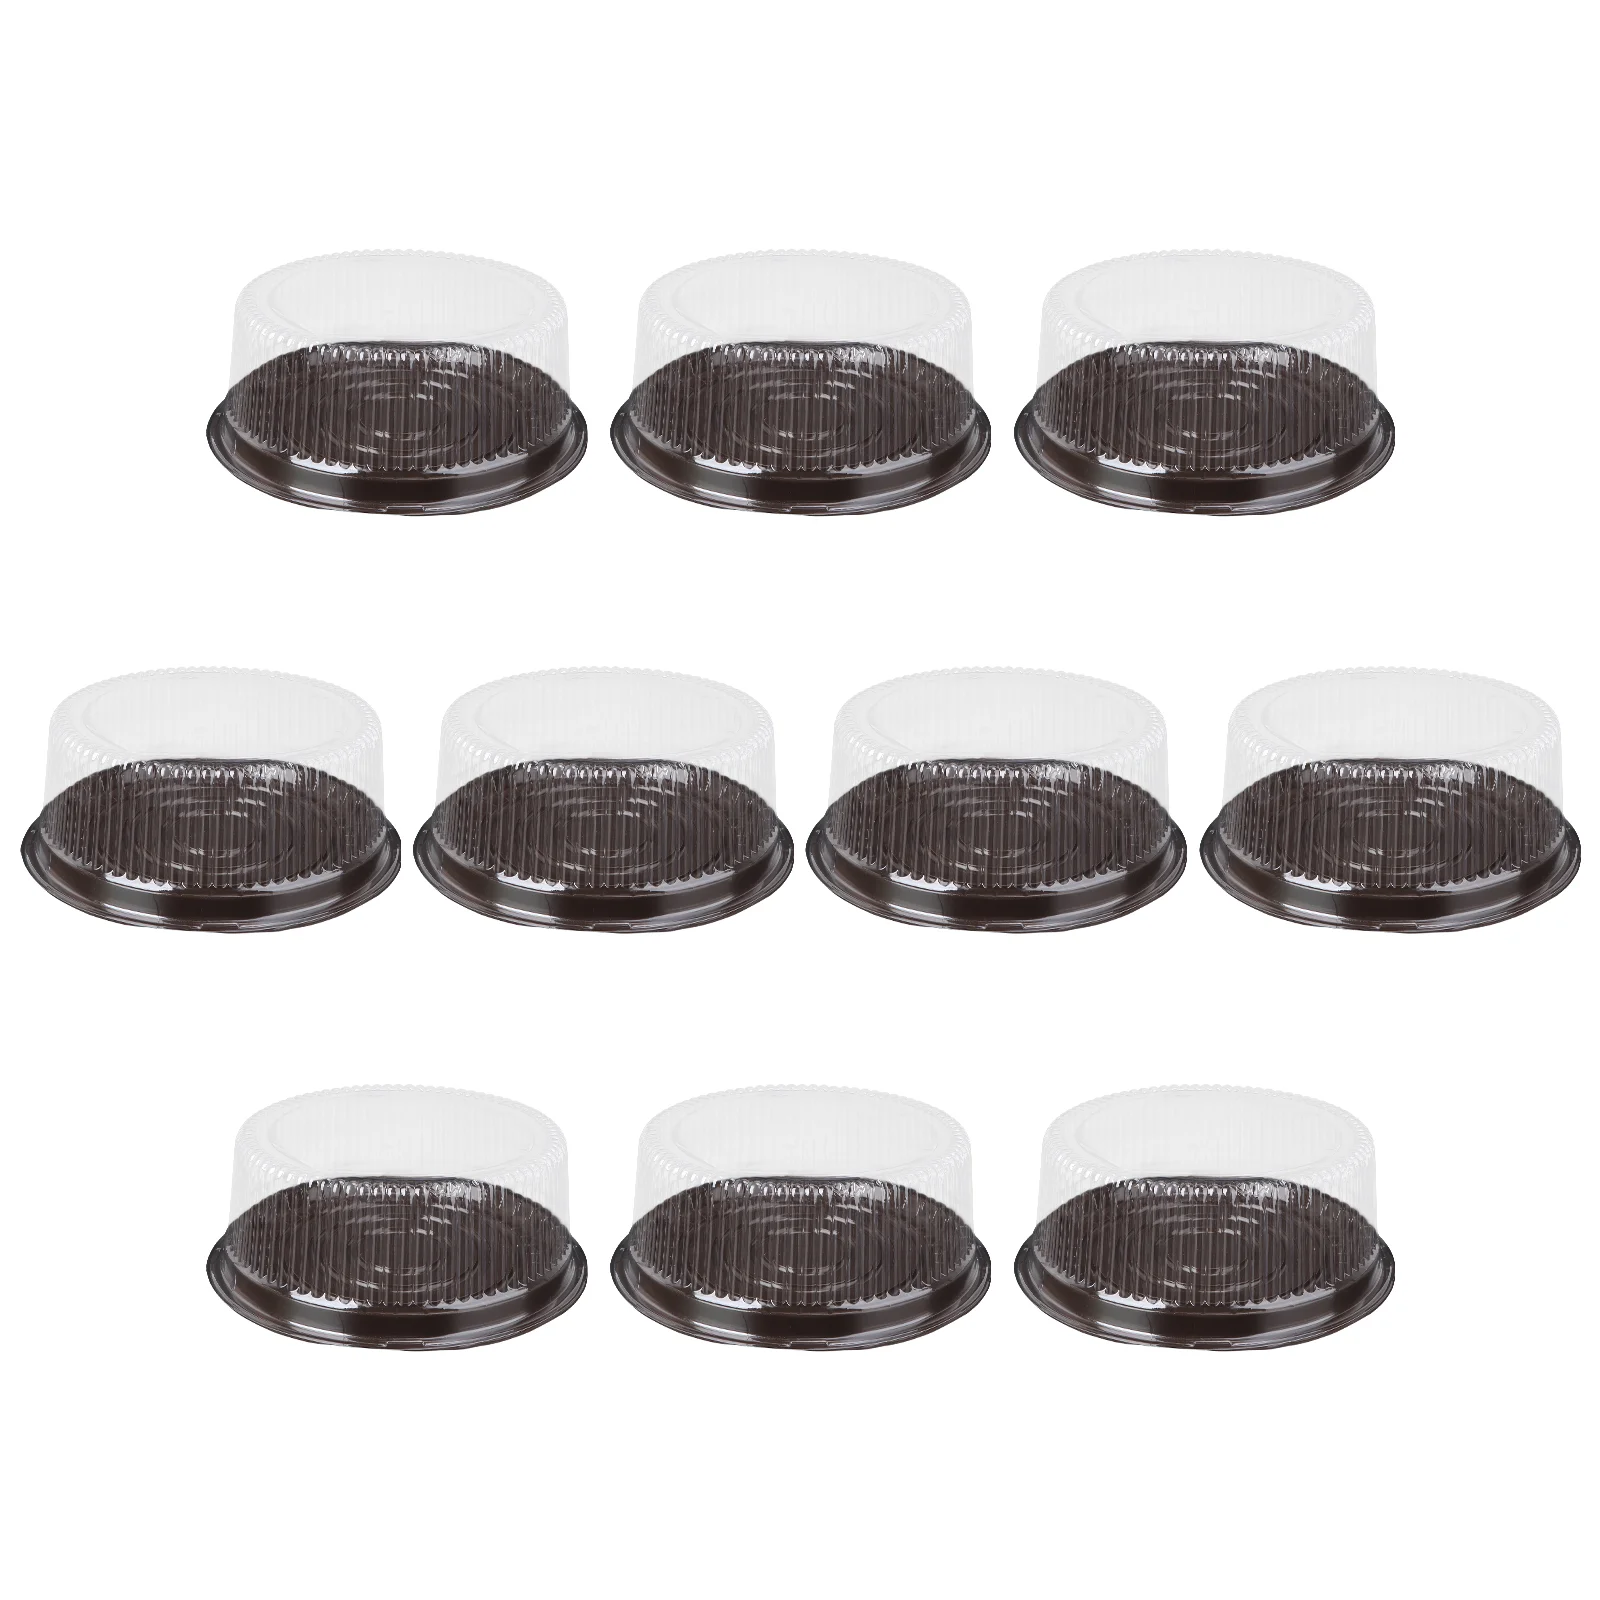 

10 Pcs Dessert Packing Box Transparent Boxes Pastry Carrier Round Cake Pie Lid Mini Muffins 8 Inch Cupcake Container Party